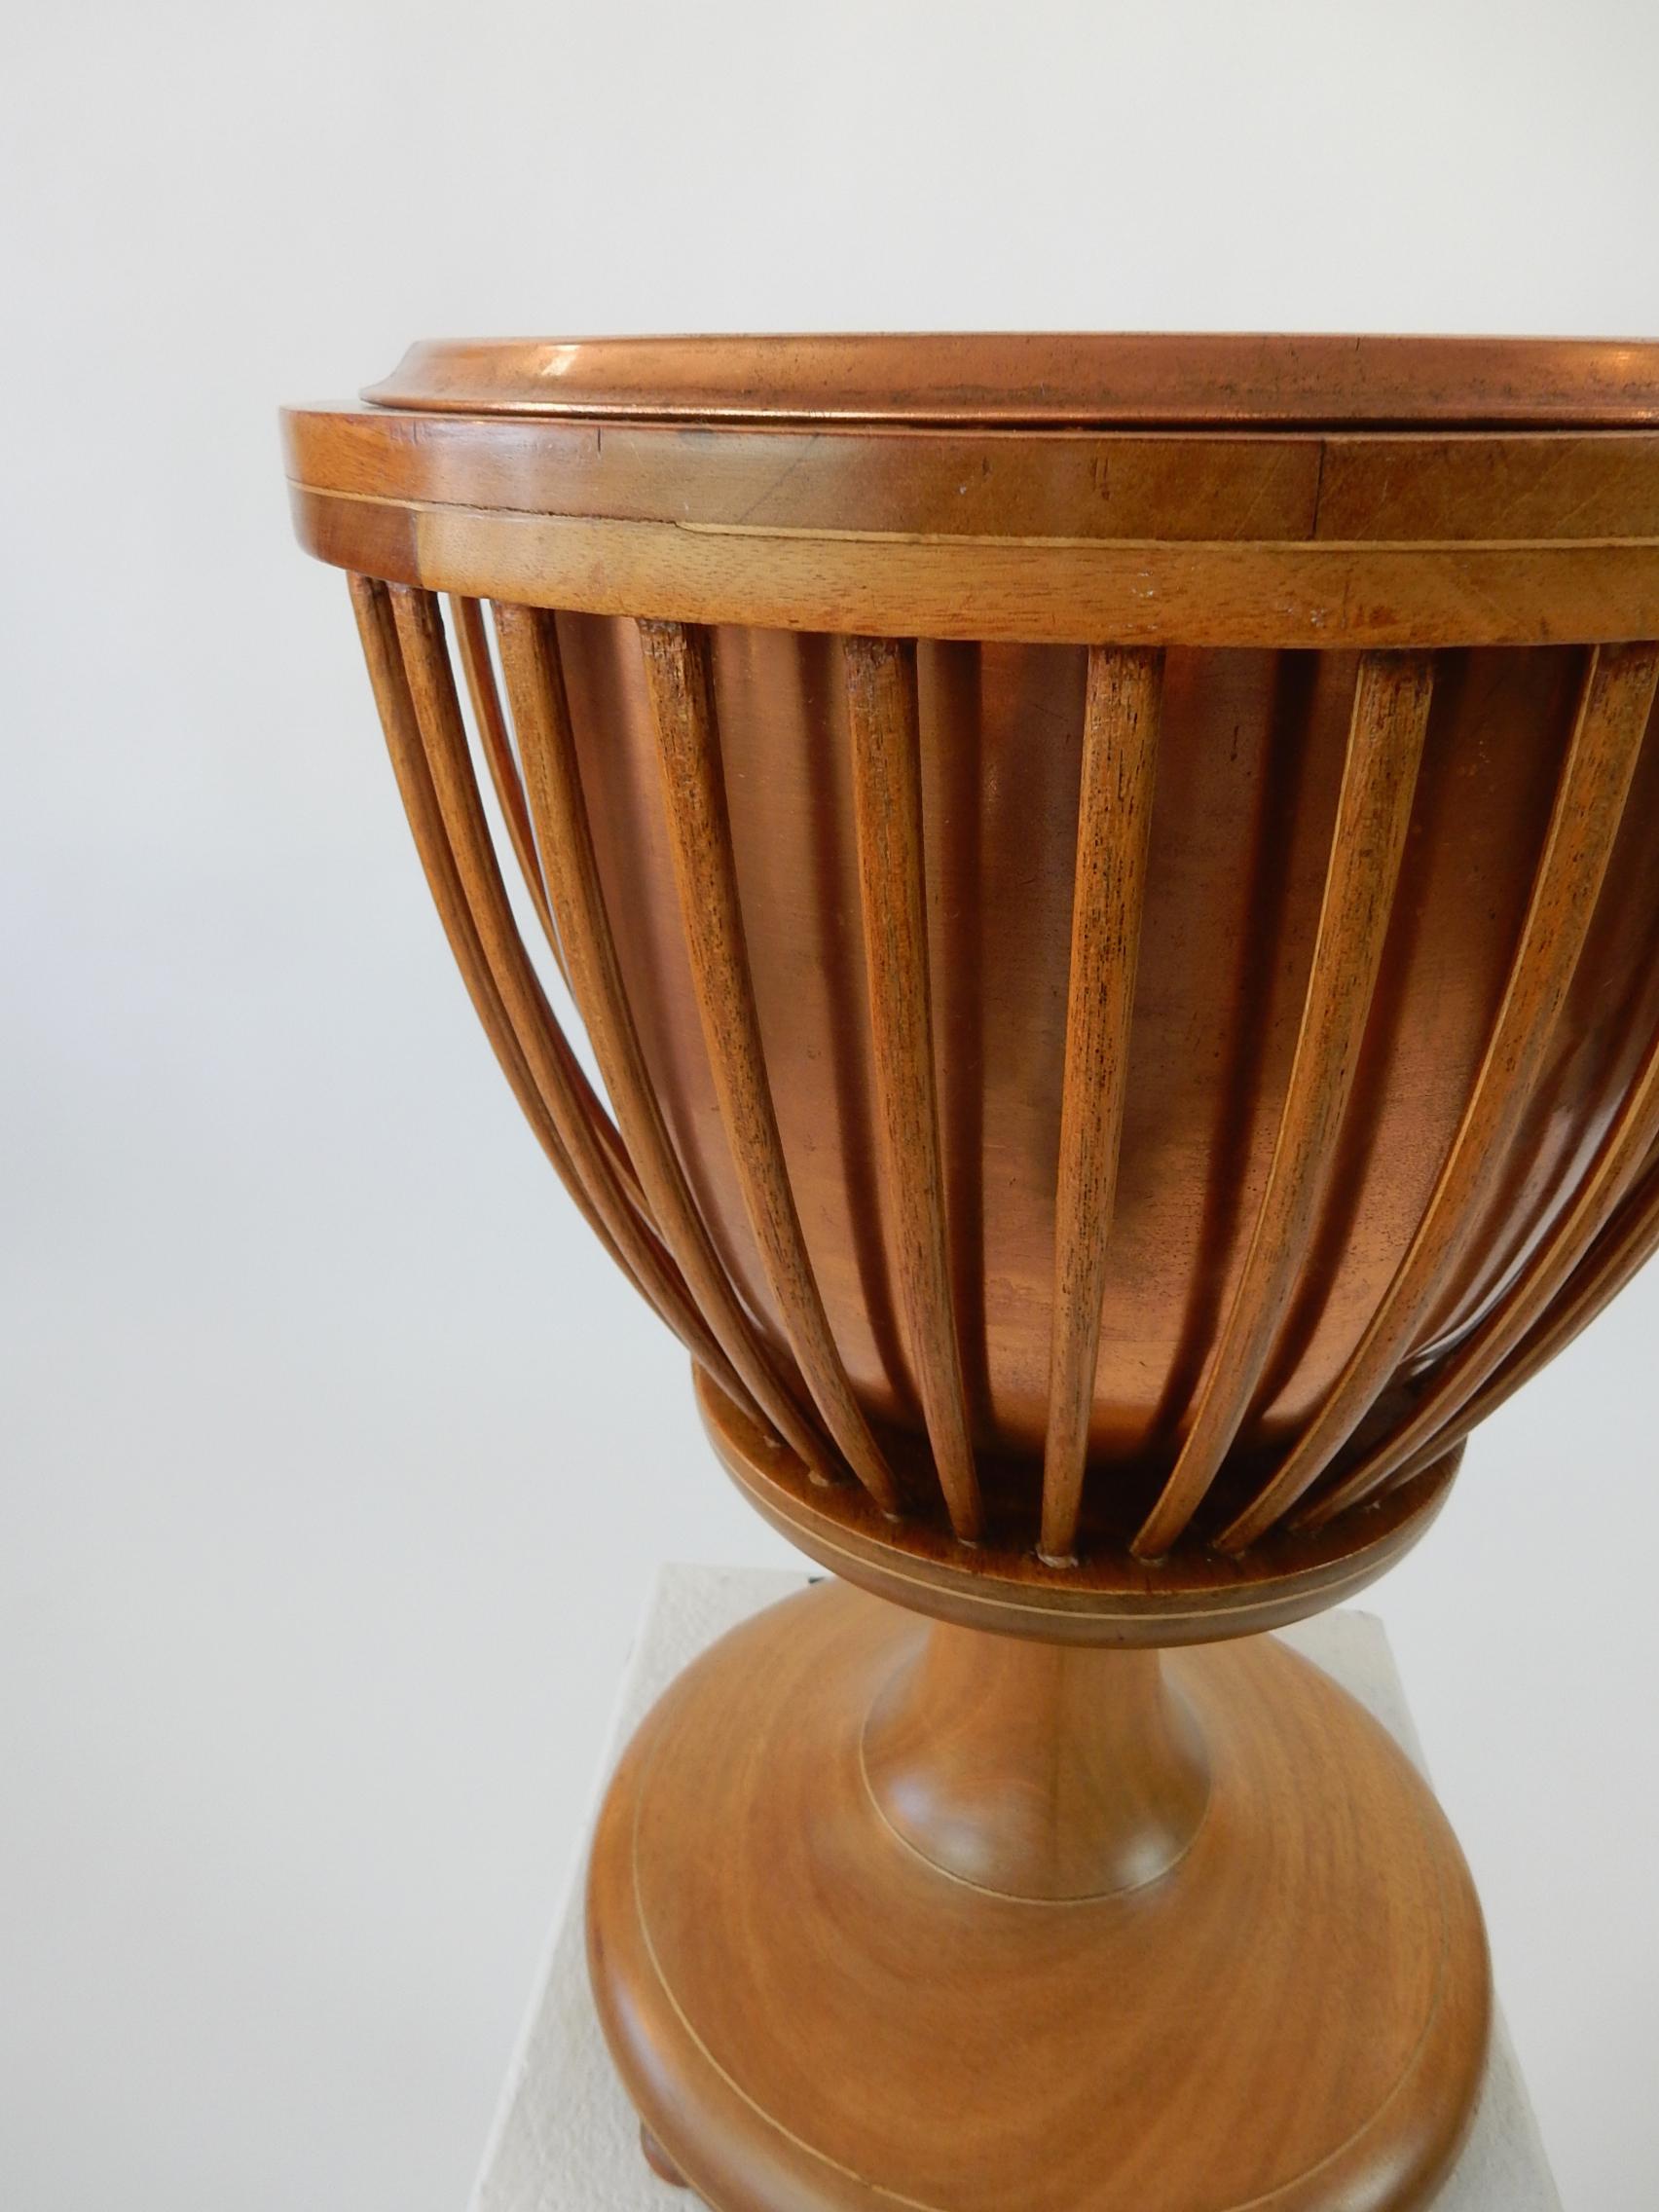 19th Century Slatted Inlaid Mahogany and Copper Jardinièr Planter For Sale 3